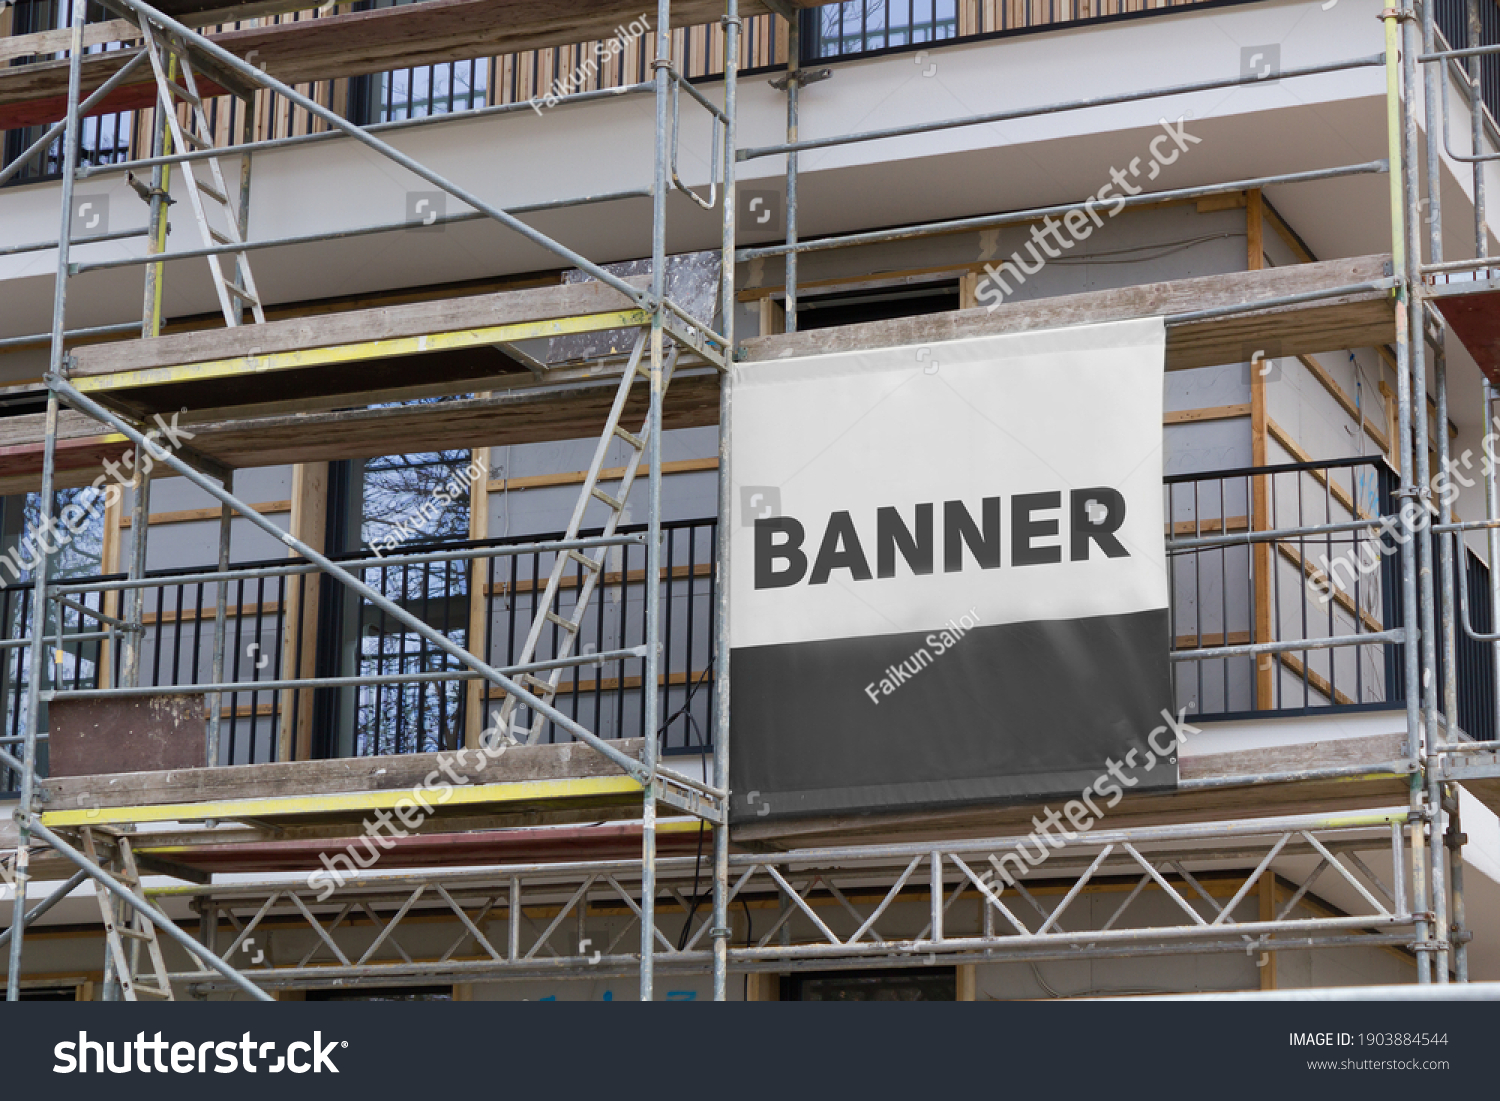 
Printed banner on the scaffolding #1903884544